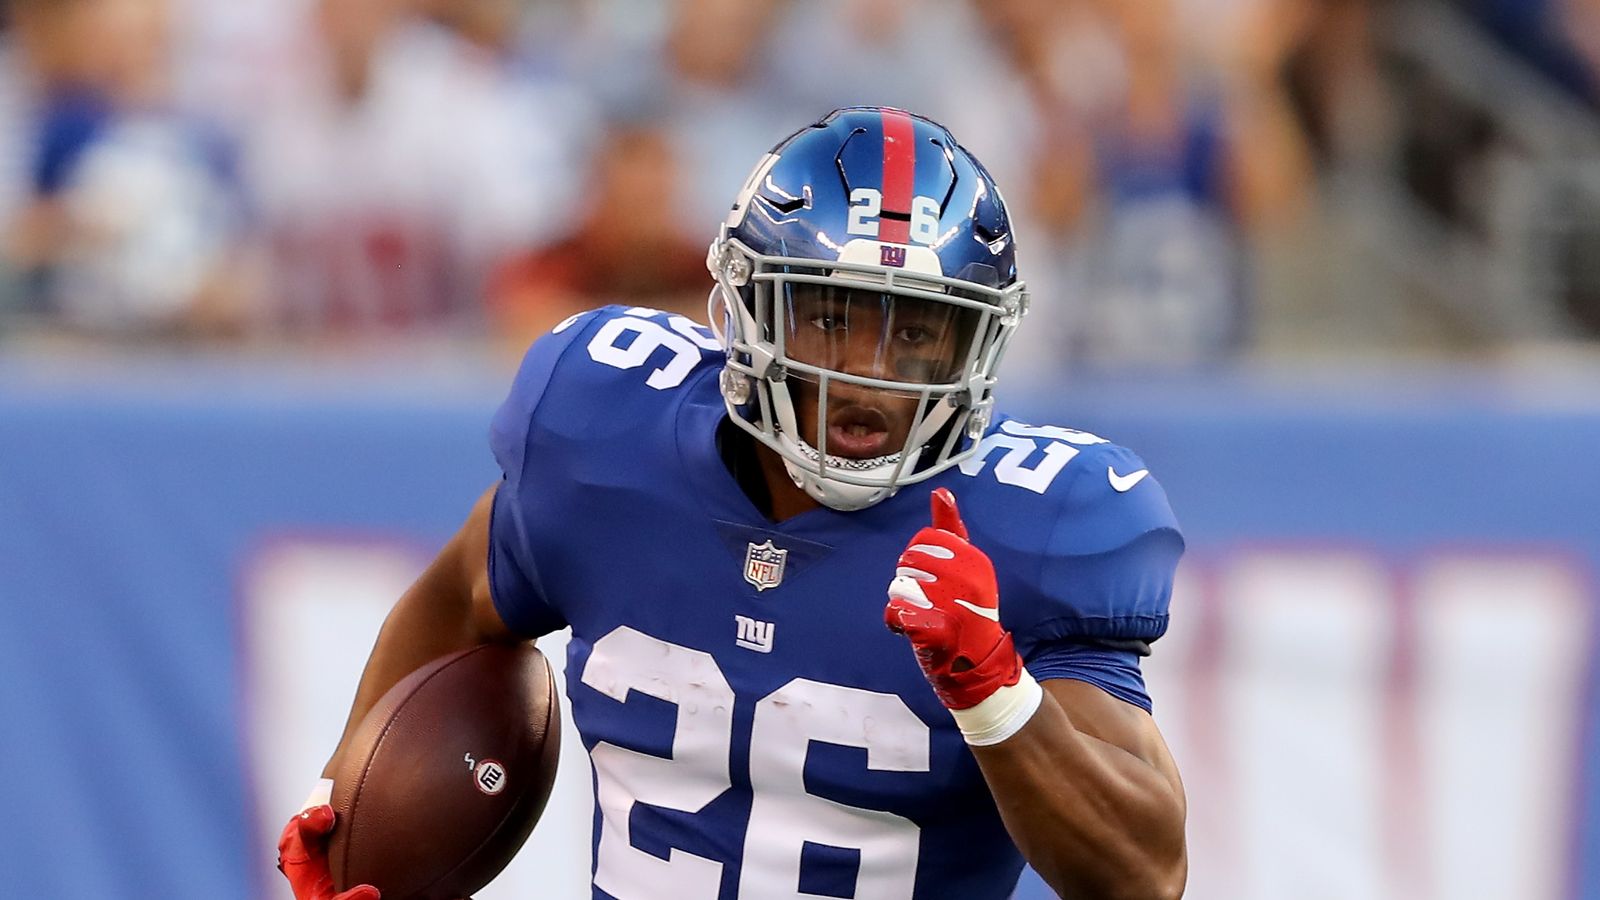 Saquon Barkley held out of New York Giants practice | NFL News | Sky Sports